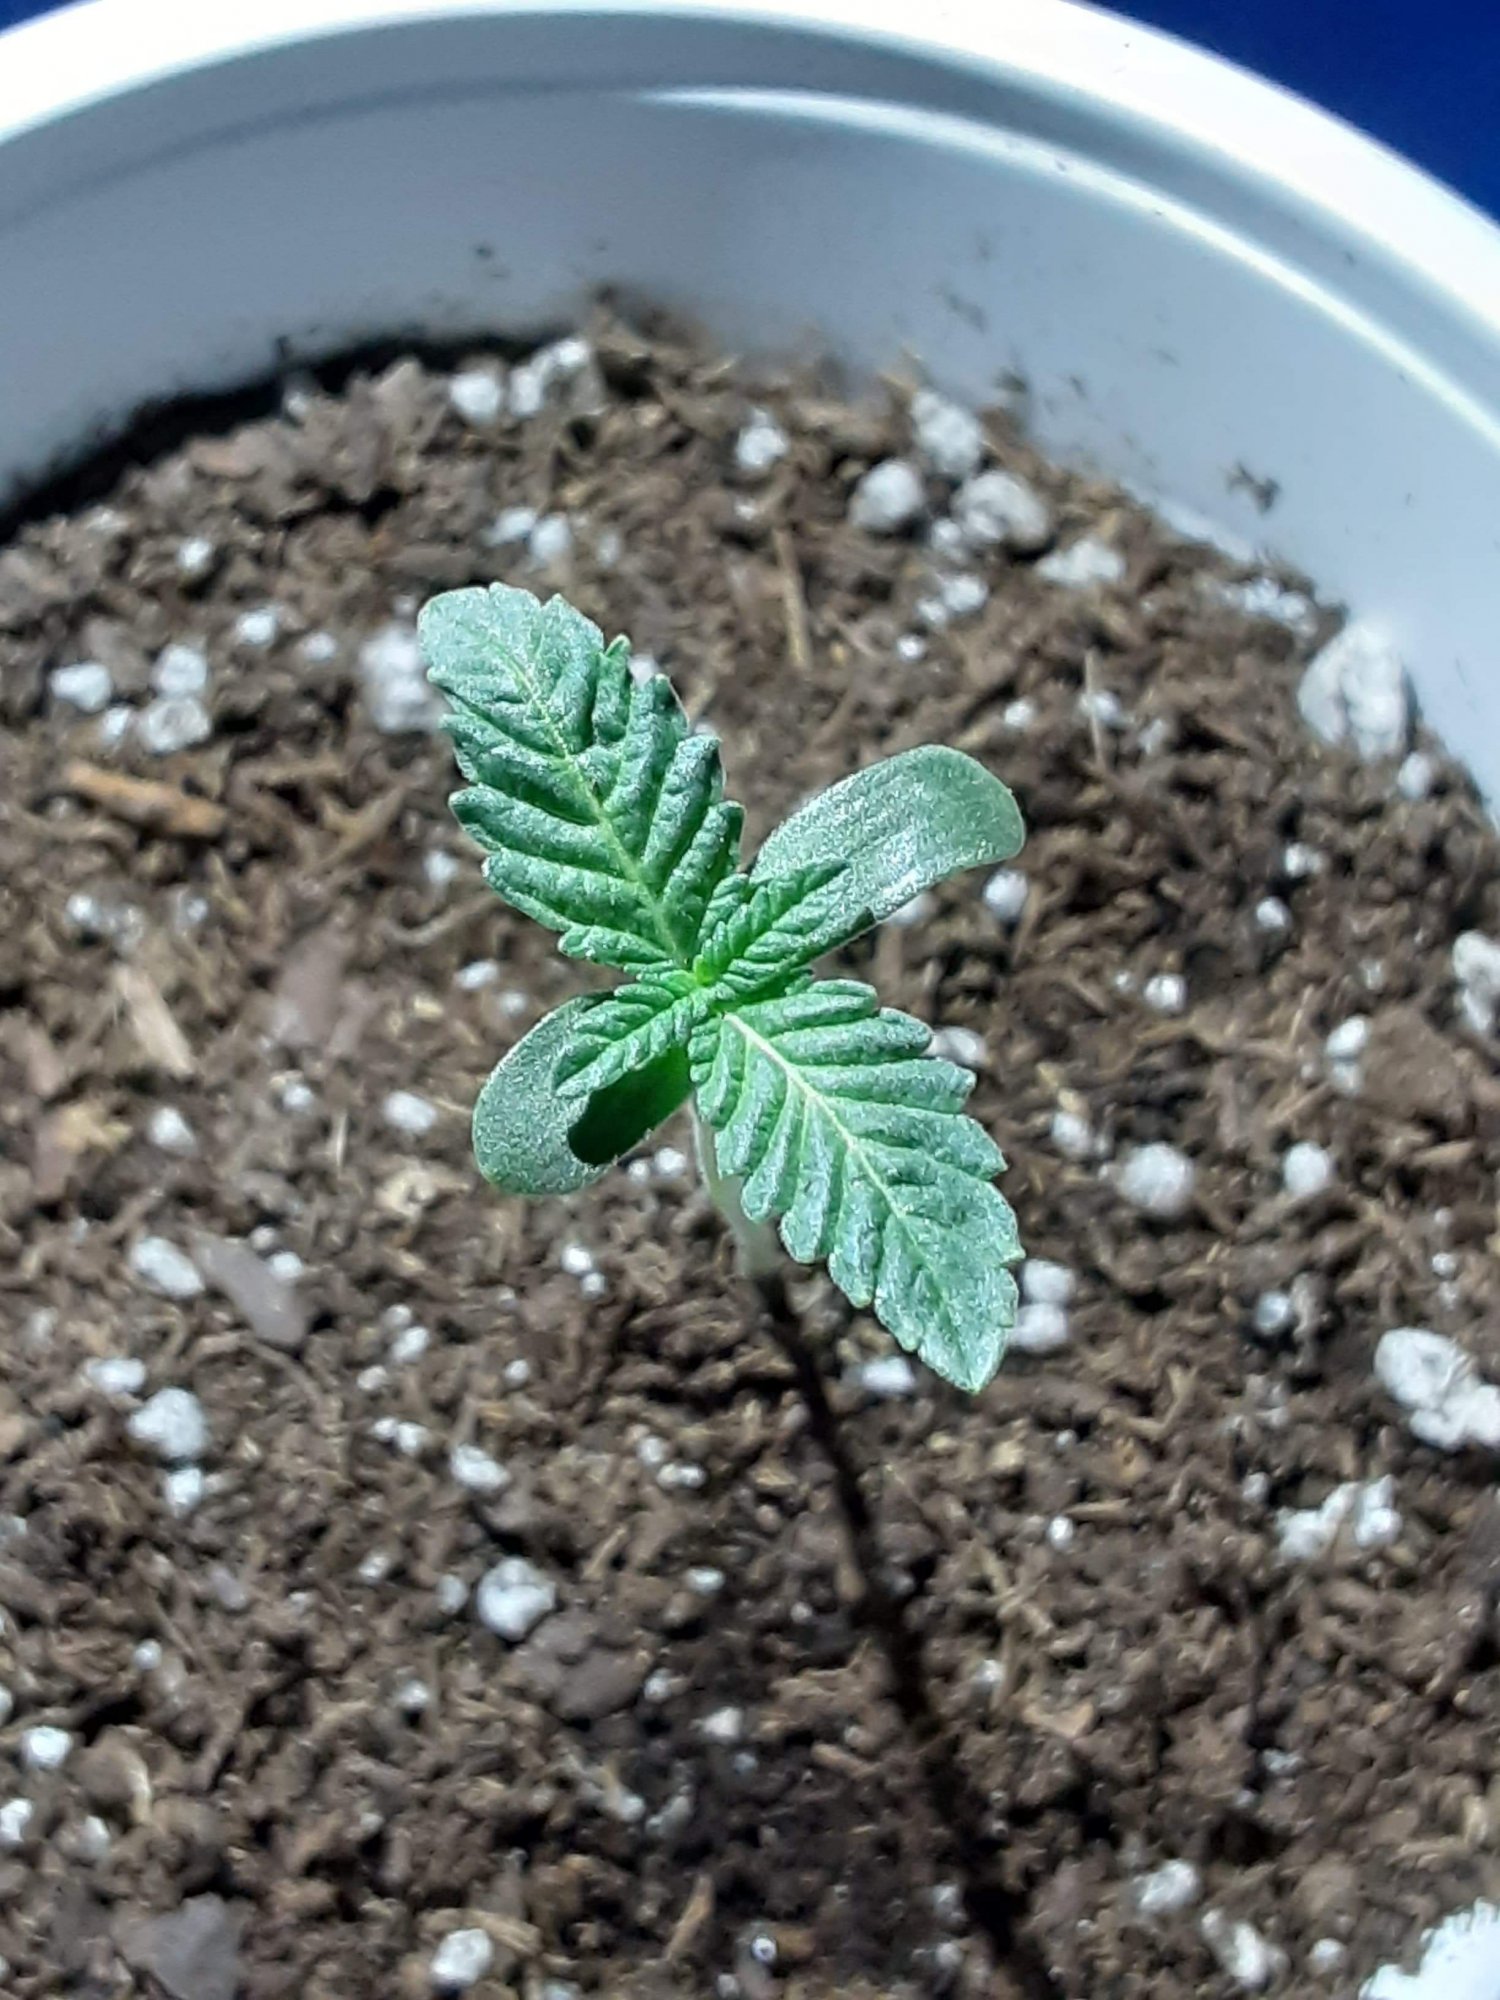 Hot donna bagseed experiment